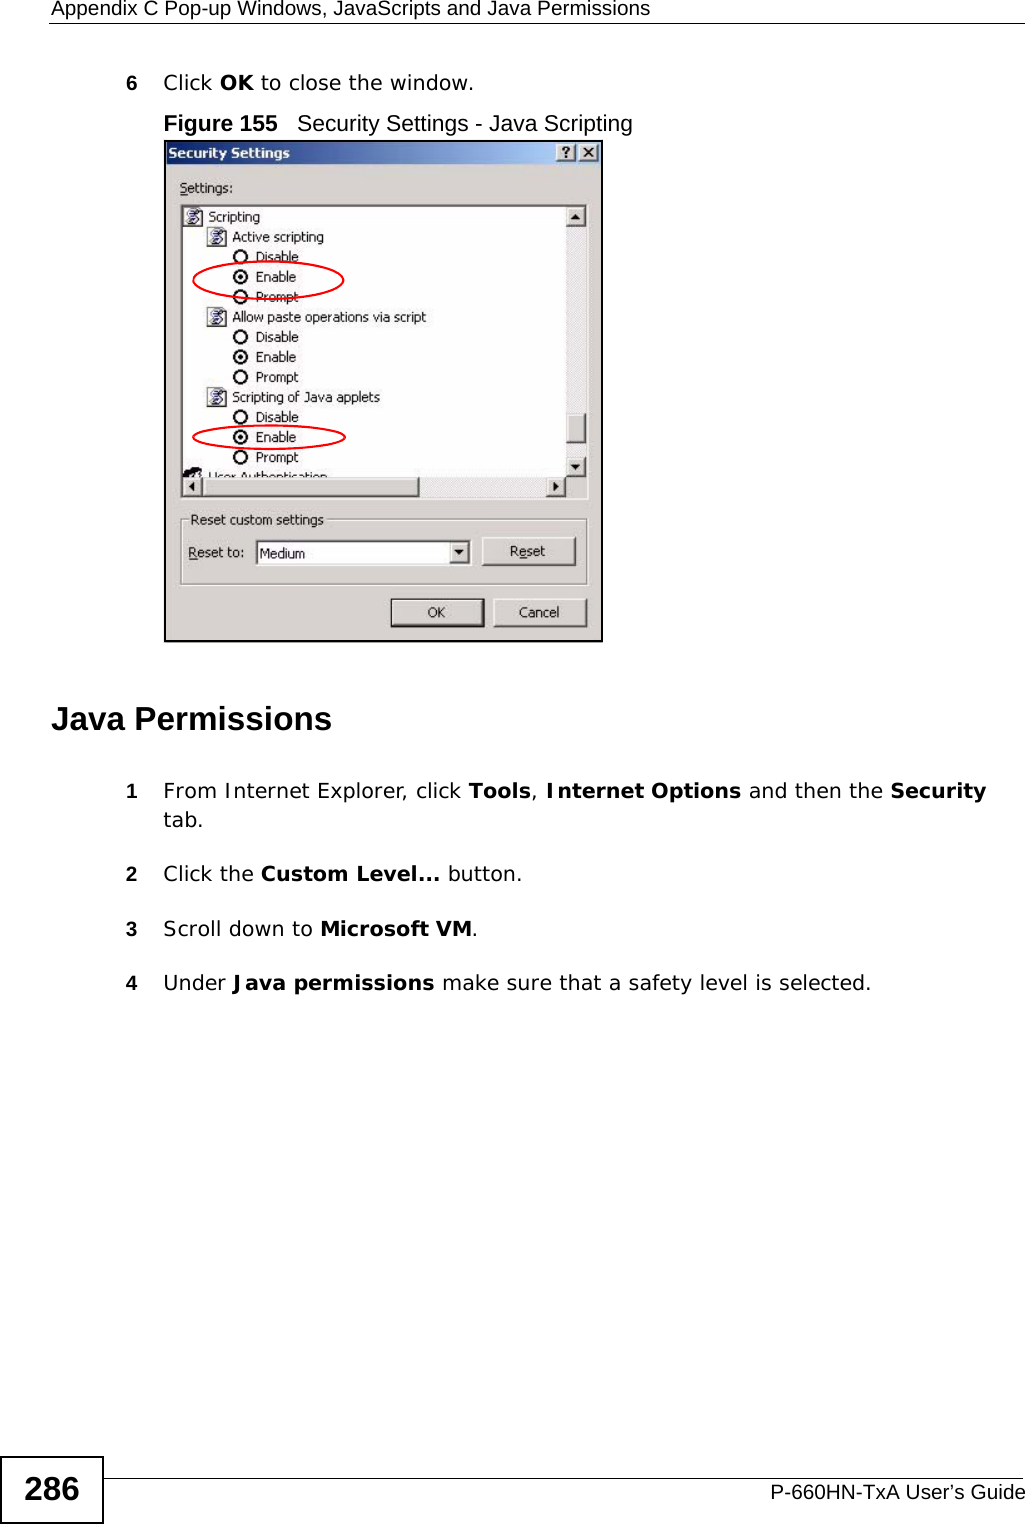 Appendix C Pop-up Windows, JavaScripts and Java PermissionsP-660HN-TxA User’s Guide2866Click OK to close the window.Figure 155   Security Settings - Java ScriptingJava Permissions1From Internet Explorer, click Tools, Internet Options and then the Security tab. 2Click the Custom Level... button. 3Scroll down to Microsoft VM. 4Under Java permissions make sure that a safety level is selected.